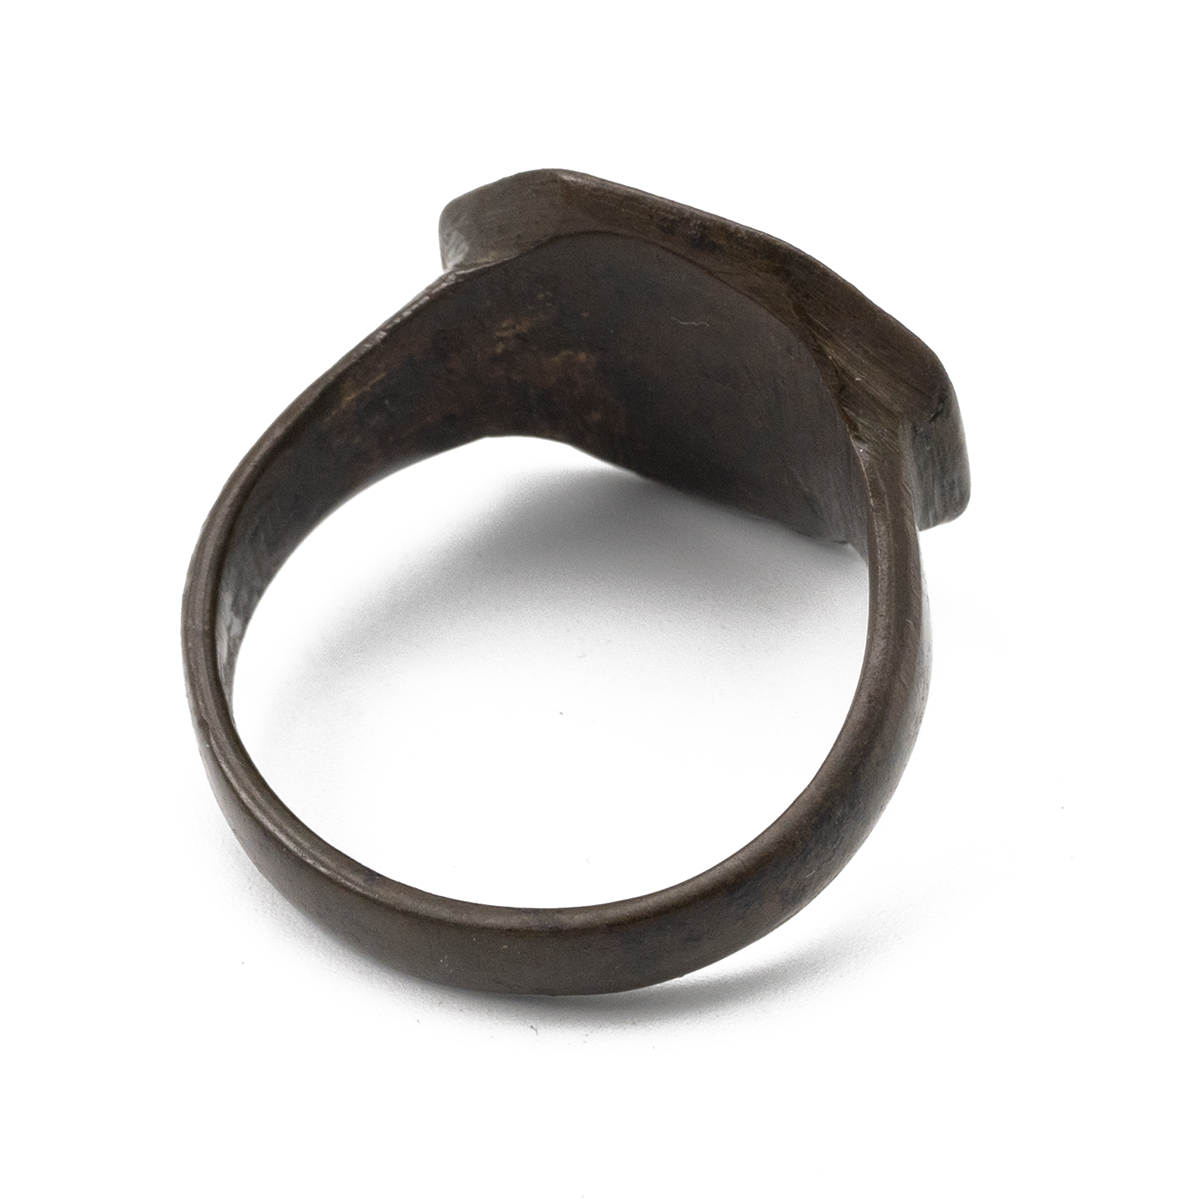 Bronze merchants ring with inscribed cross keys motif and scroll design on a chamfered square pan... - Image 3 of 3